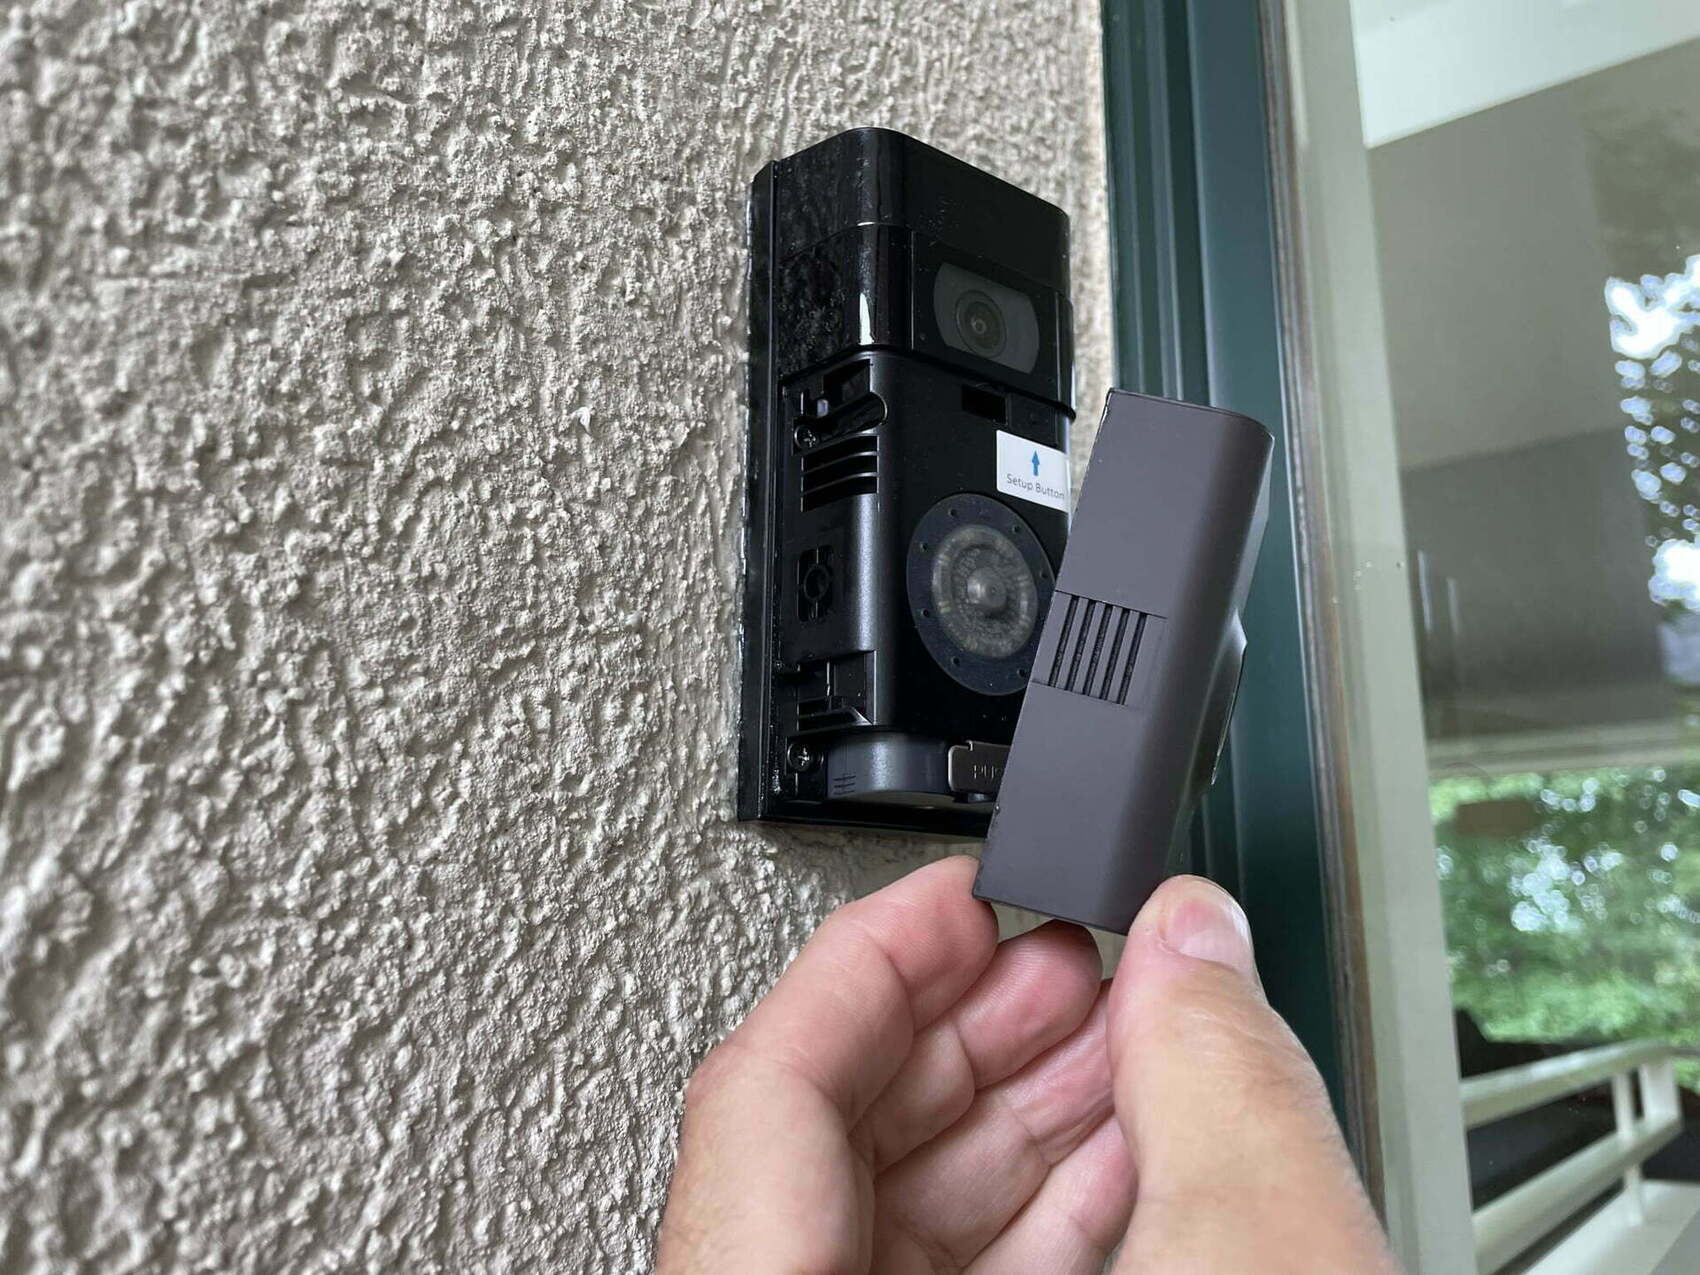 How To Remove Faceplate From Ring Video Doorbell 2